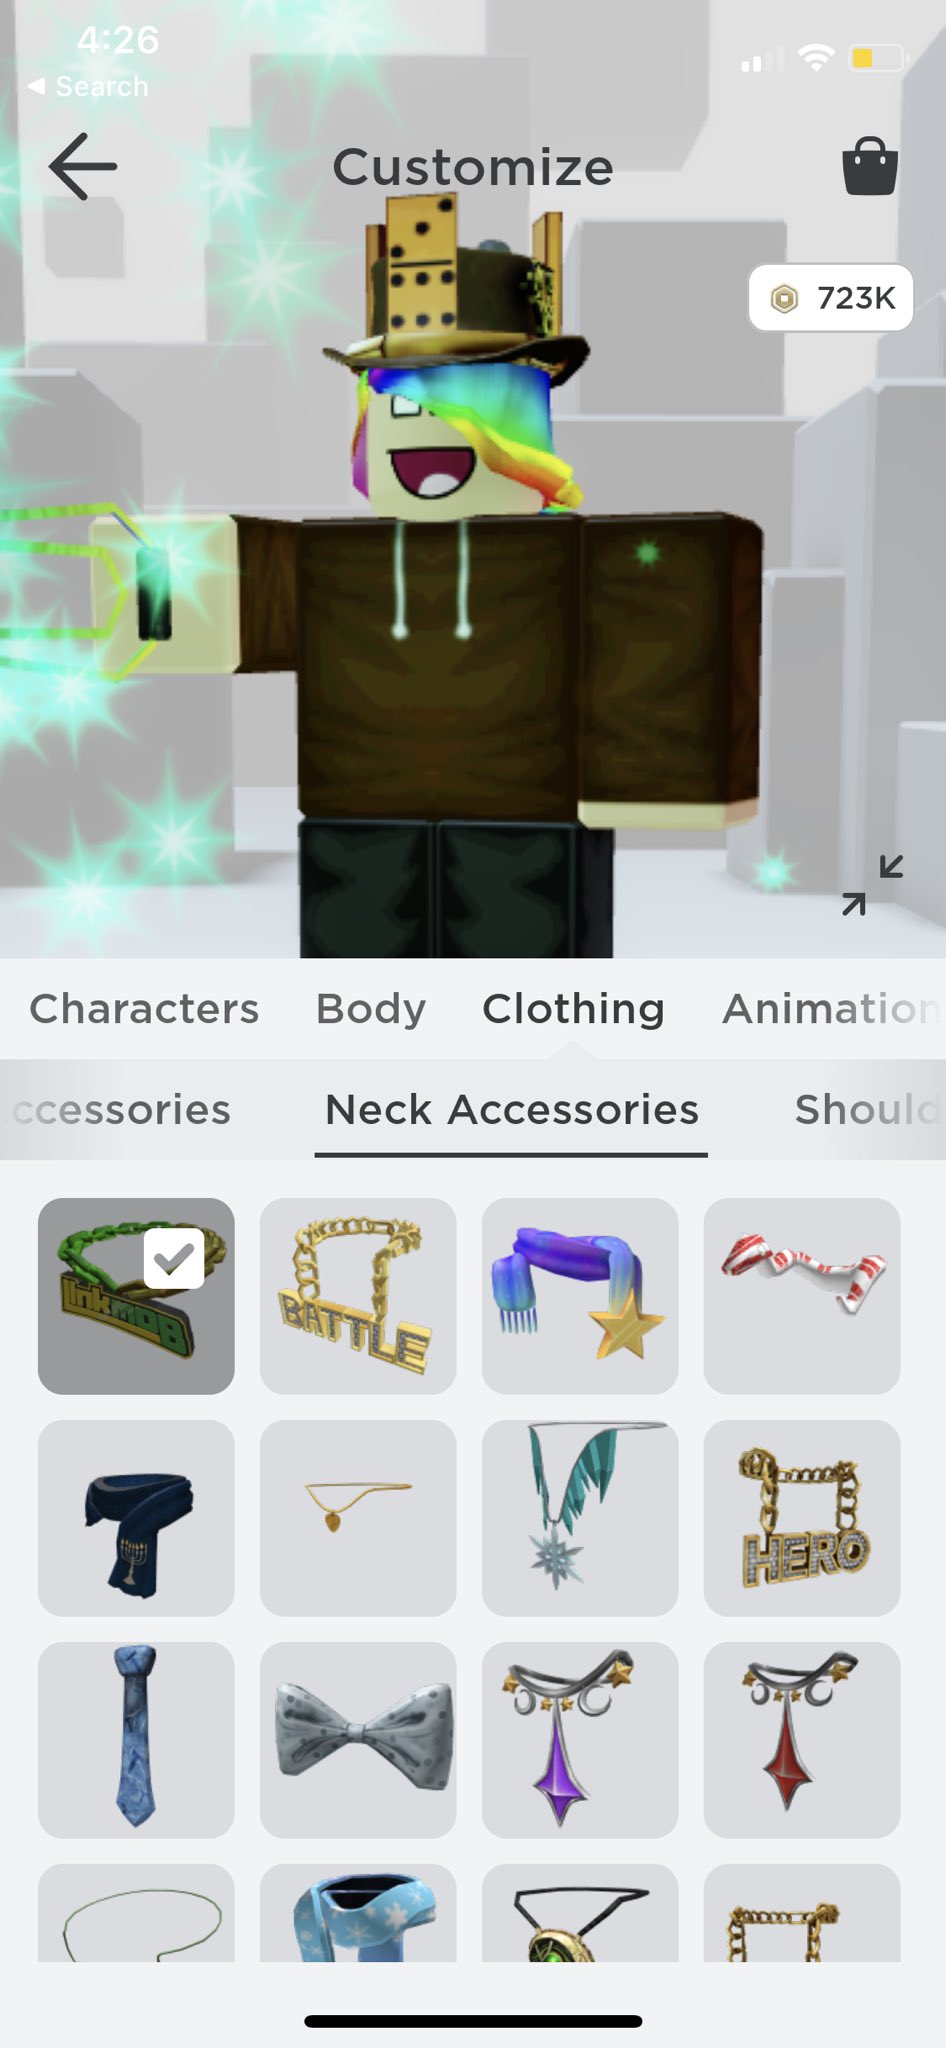 Tommy Code Linkmon99 On Twitter My First Ever Ugc Item Is Finally Live Https T Co Kv1xwxovzw It S The Accessory Form Of The T Shirt Necklace I Ve Worn On My Avatar For The Past - richest roblox avatar ever